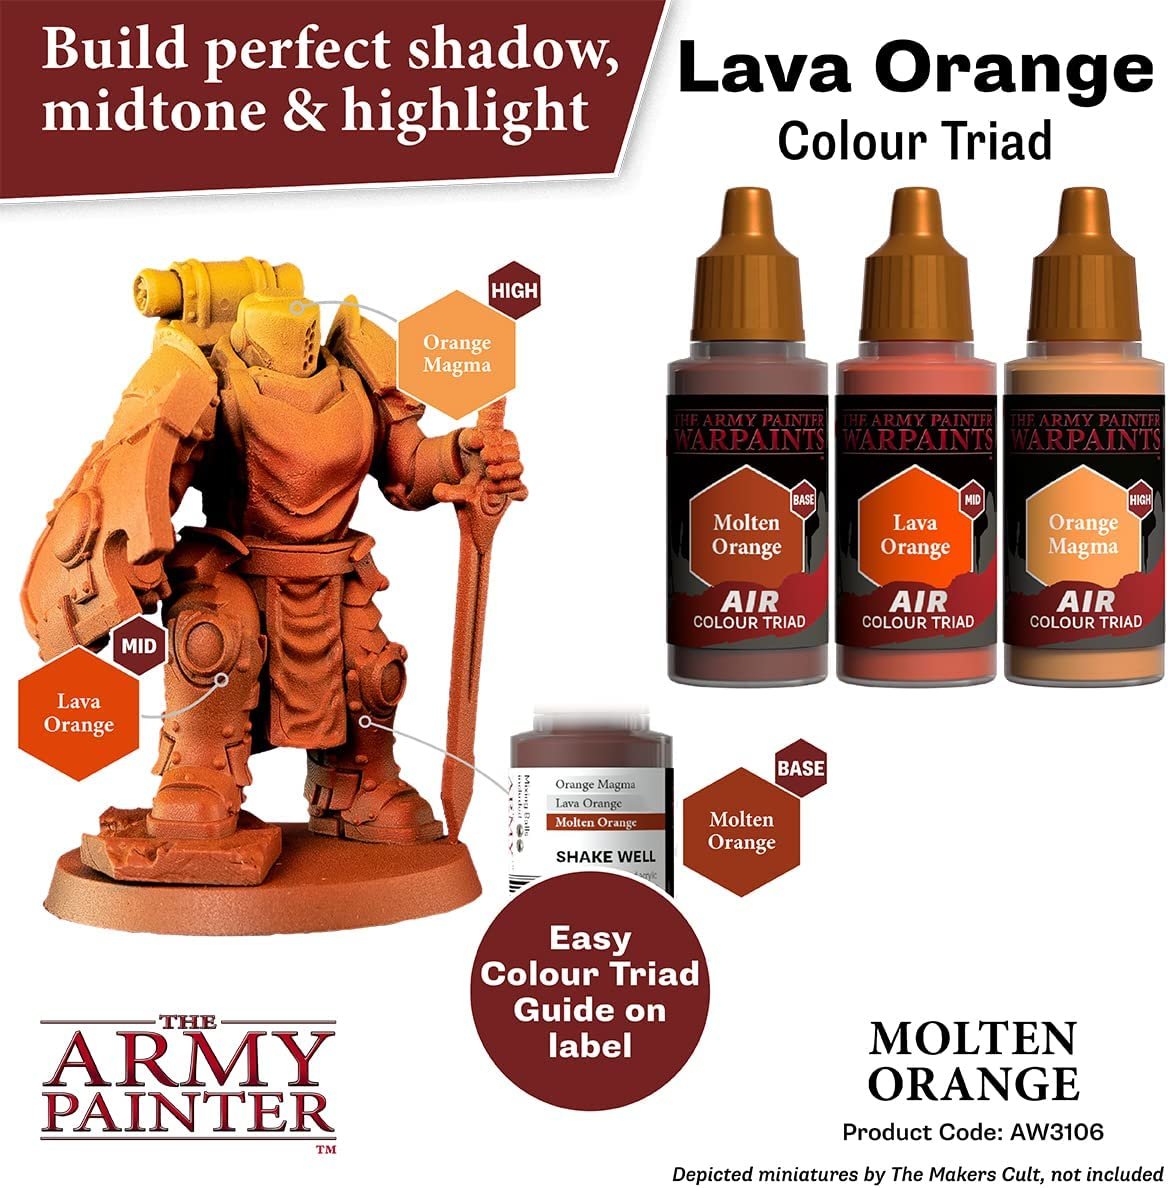 Army Painter Warpaints Air Metallics (Tainted Gold)